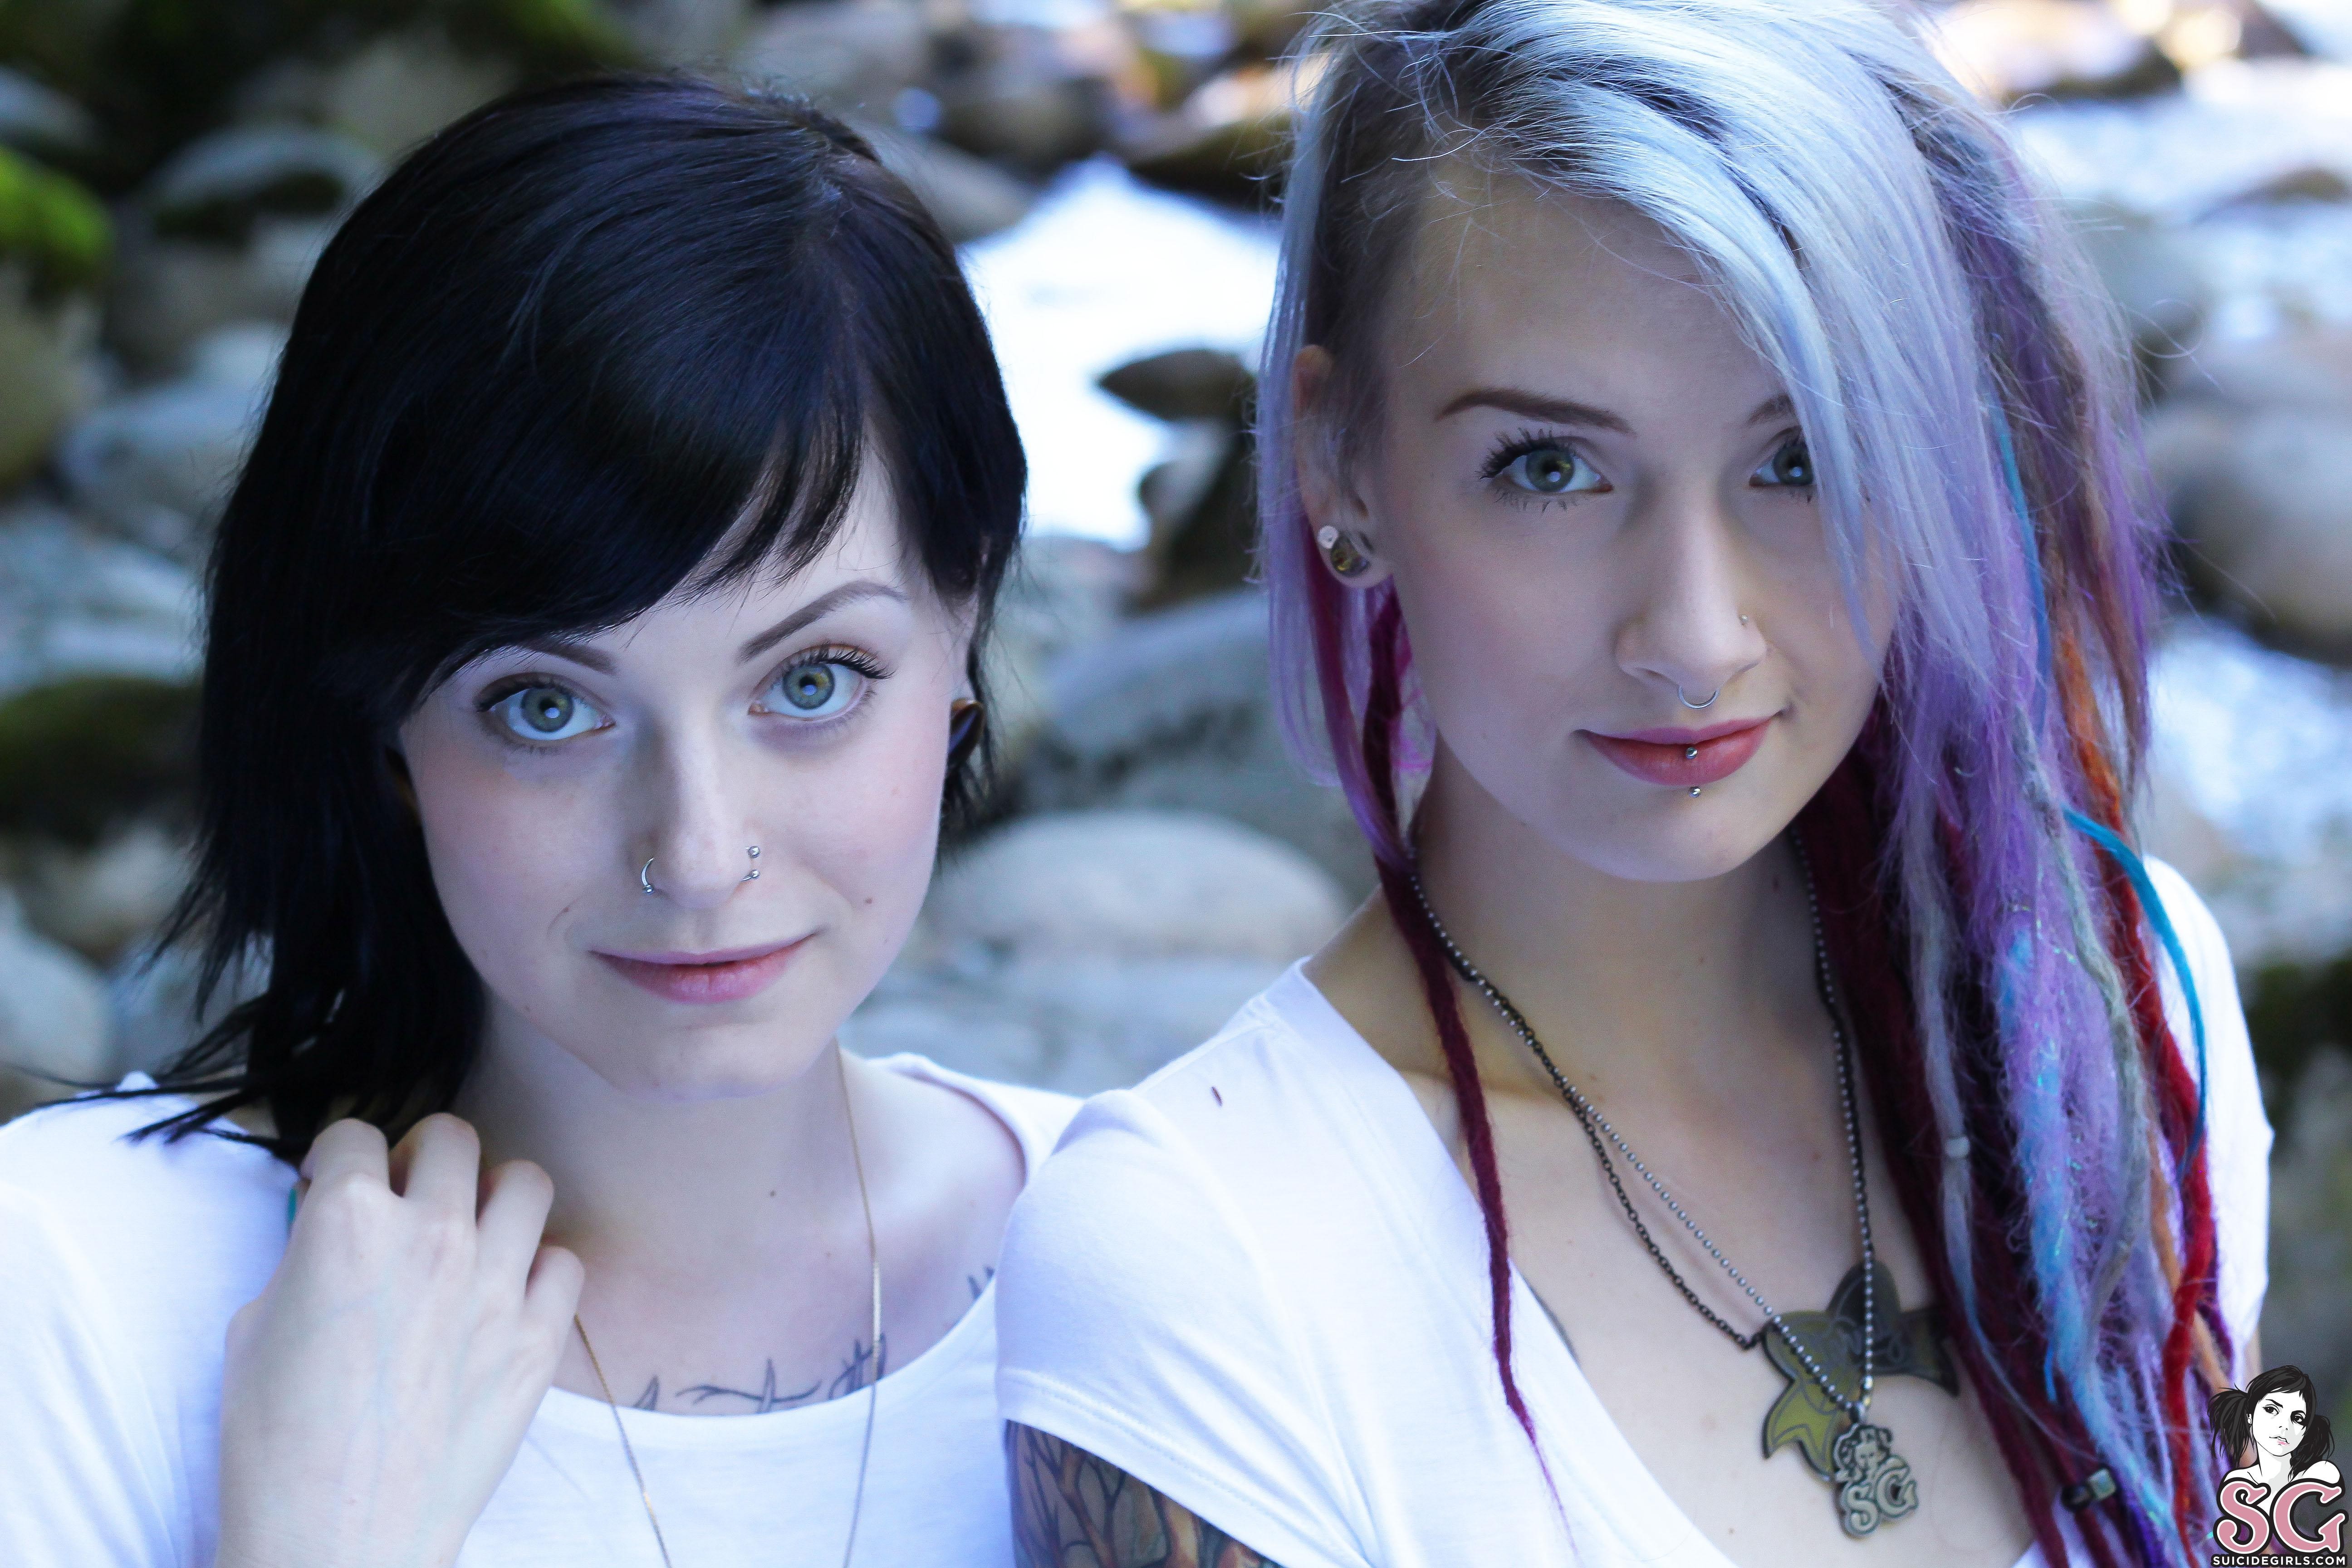 People 5184x3456 Ceres Suicide Suicide Girls piercing tattoo women looking at viewer Stormyent Suicide T-shirt white tops two women face watermarked multi-colored hair black hair women outdoors pierced lip inked girls model